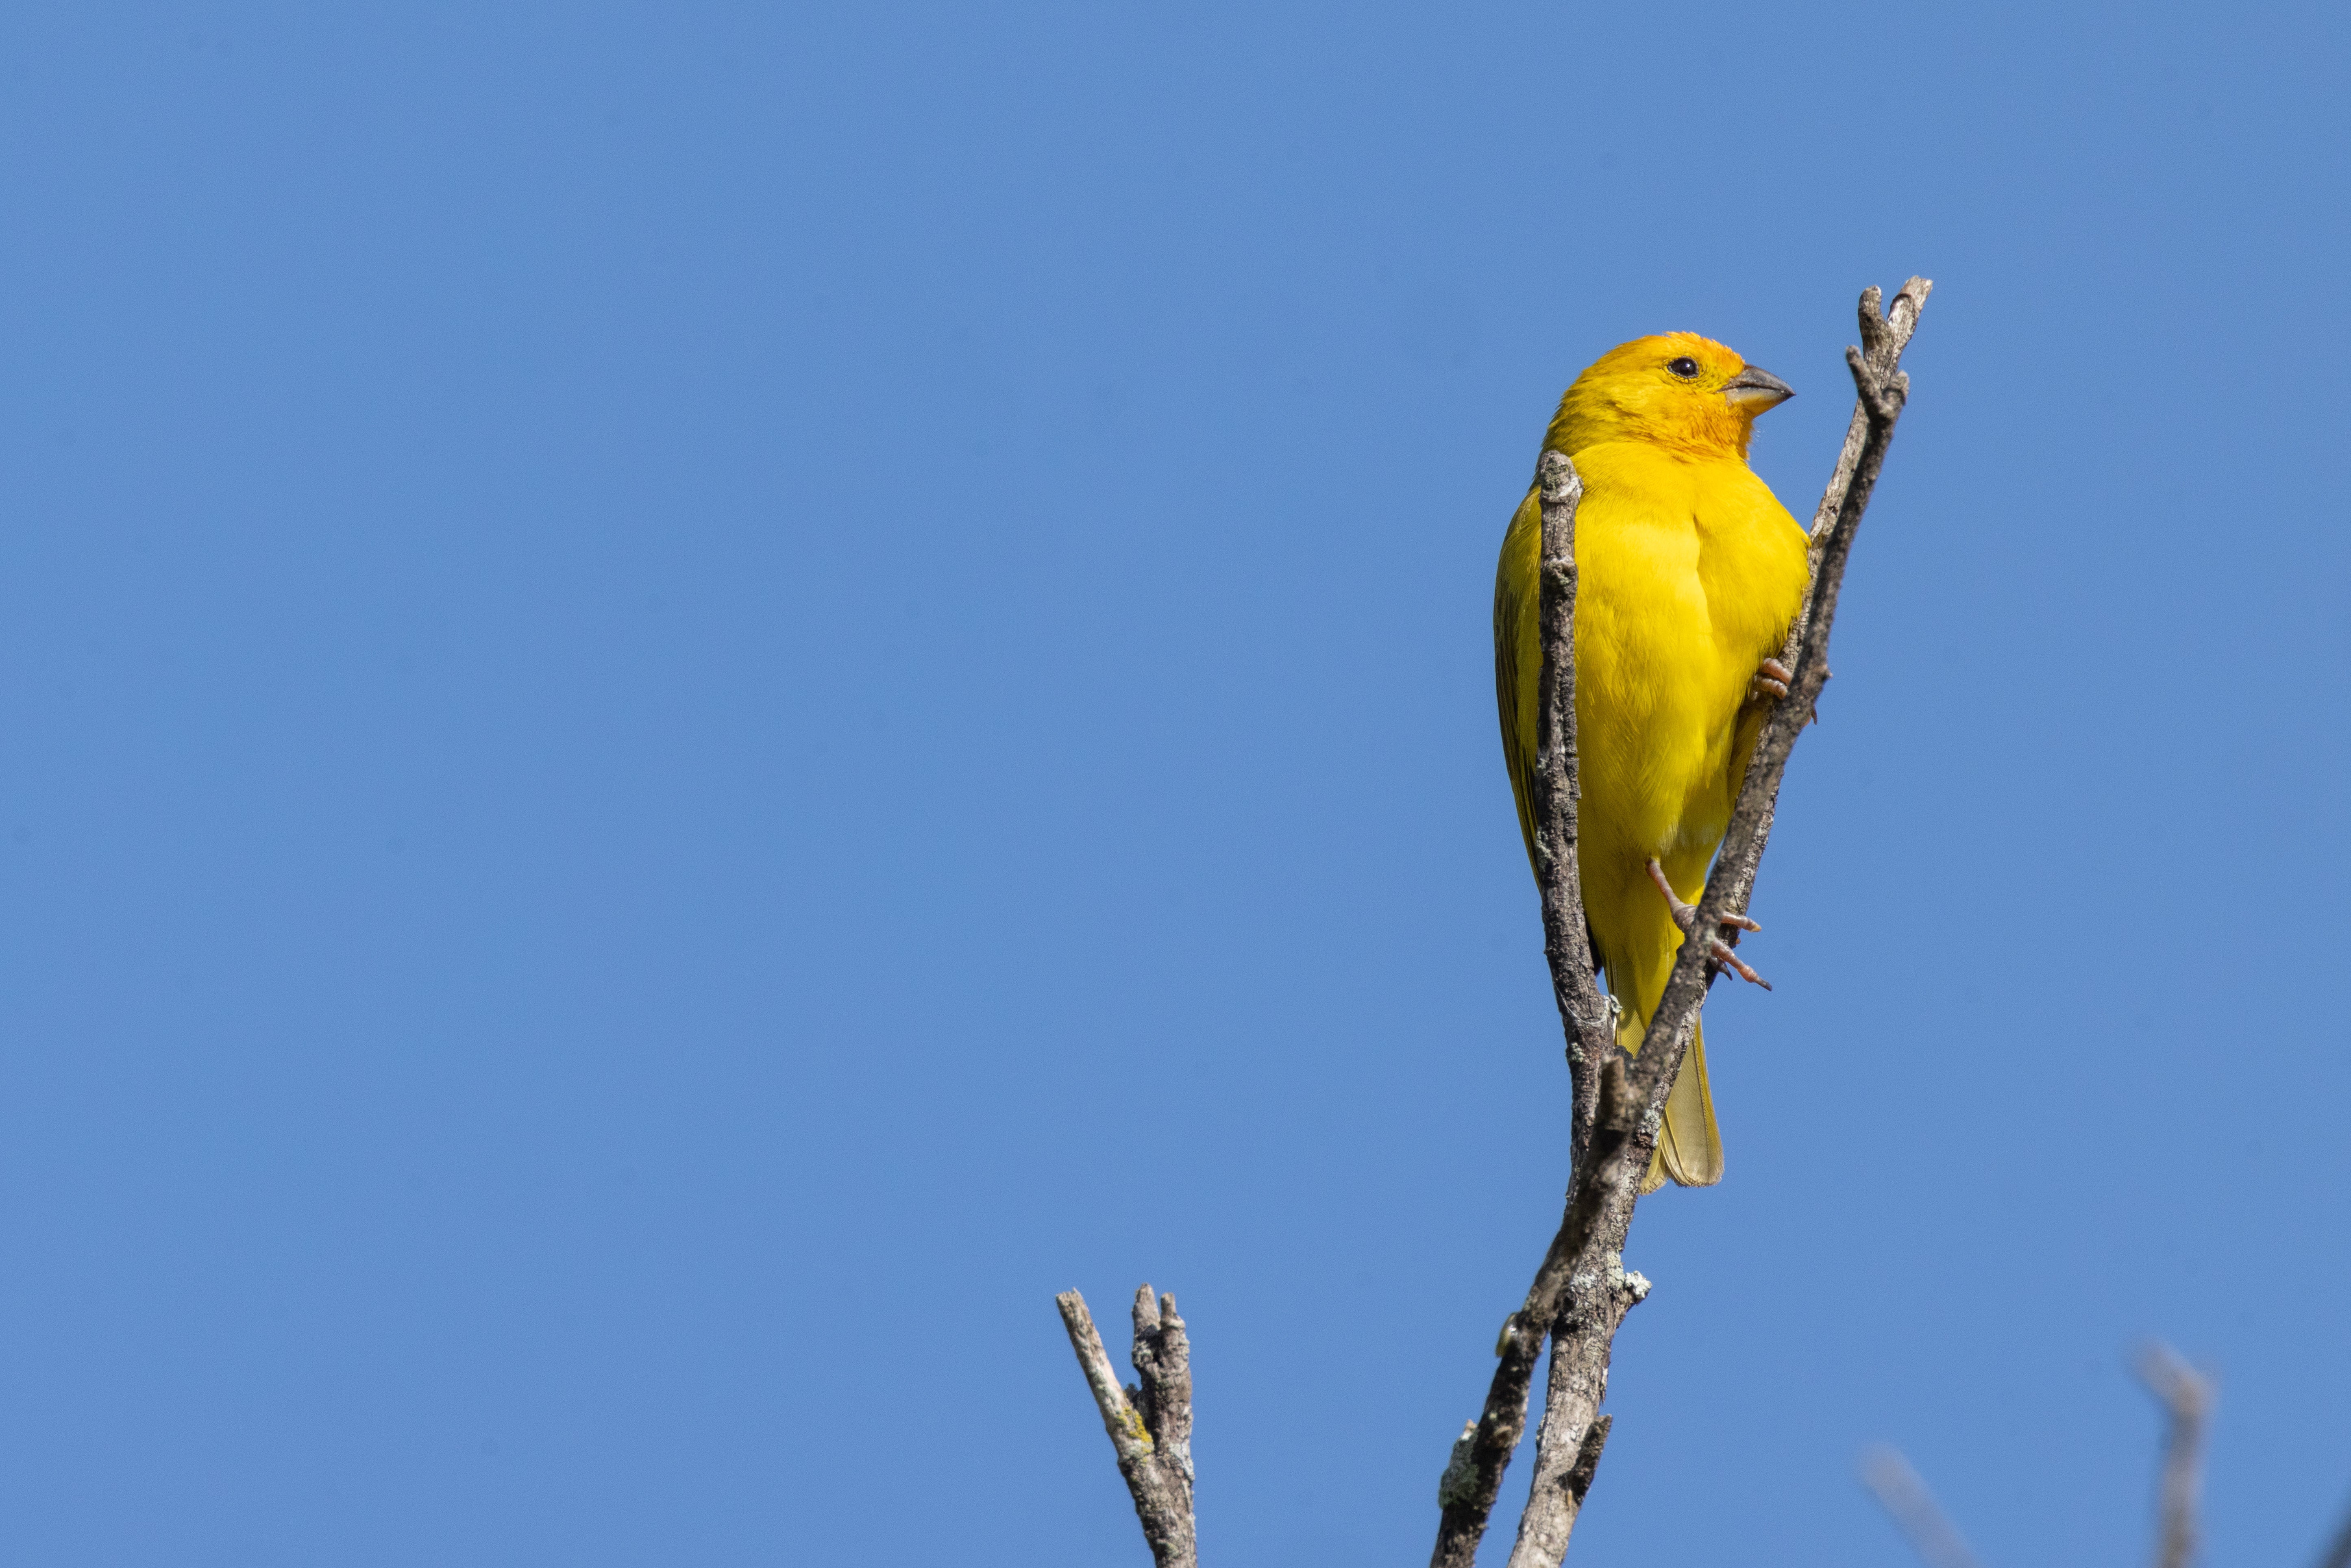 A brightly colored yellow songbird perches on a tree branch.